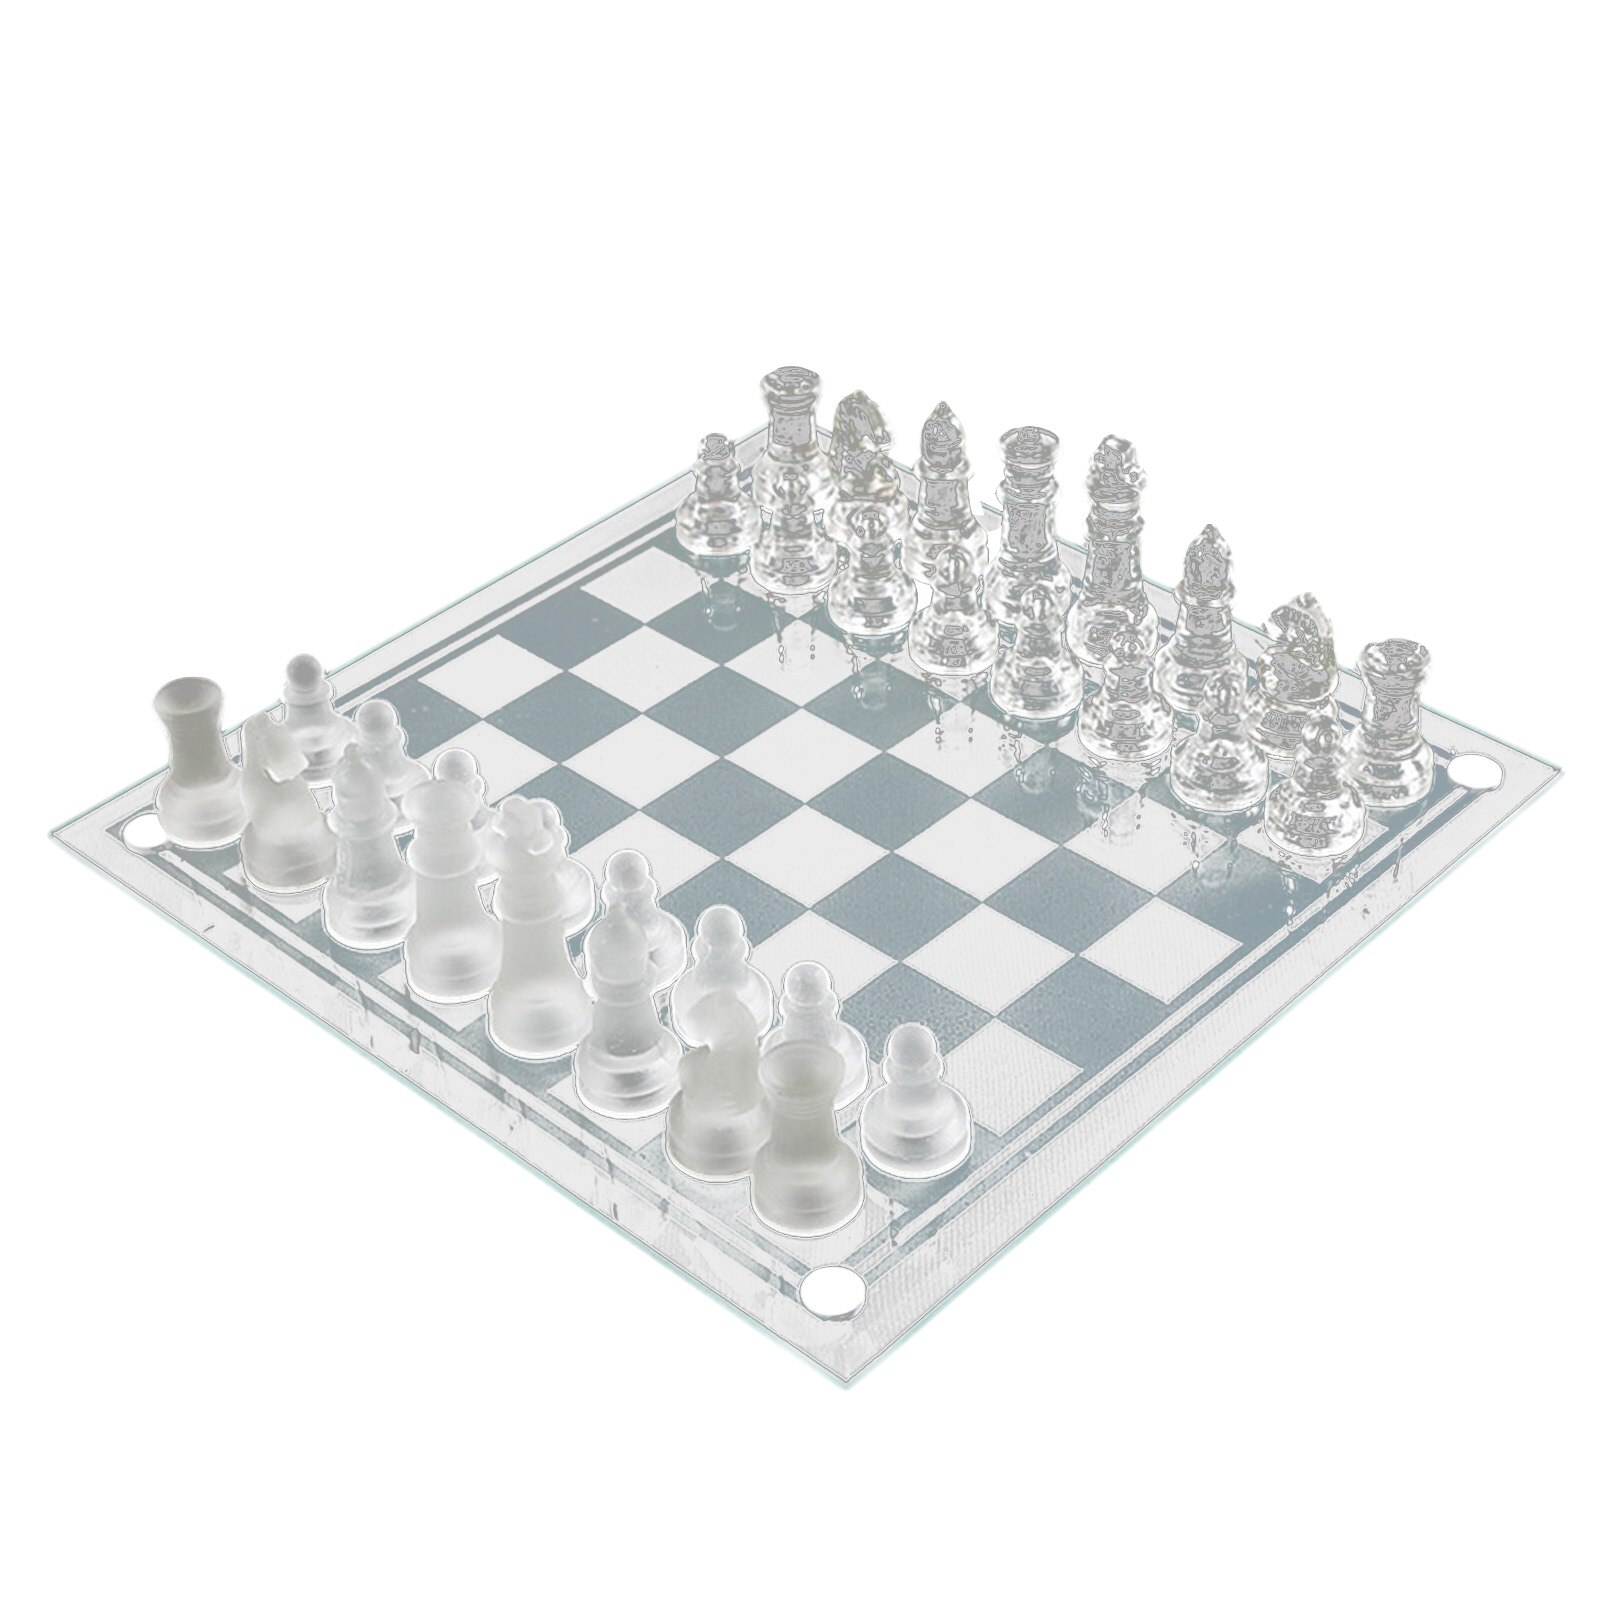 Glass Chess Game Uses High Chess Chess Board Childrens Party Entertainment Game Pieces: 25x25cm